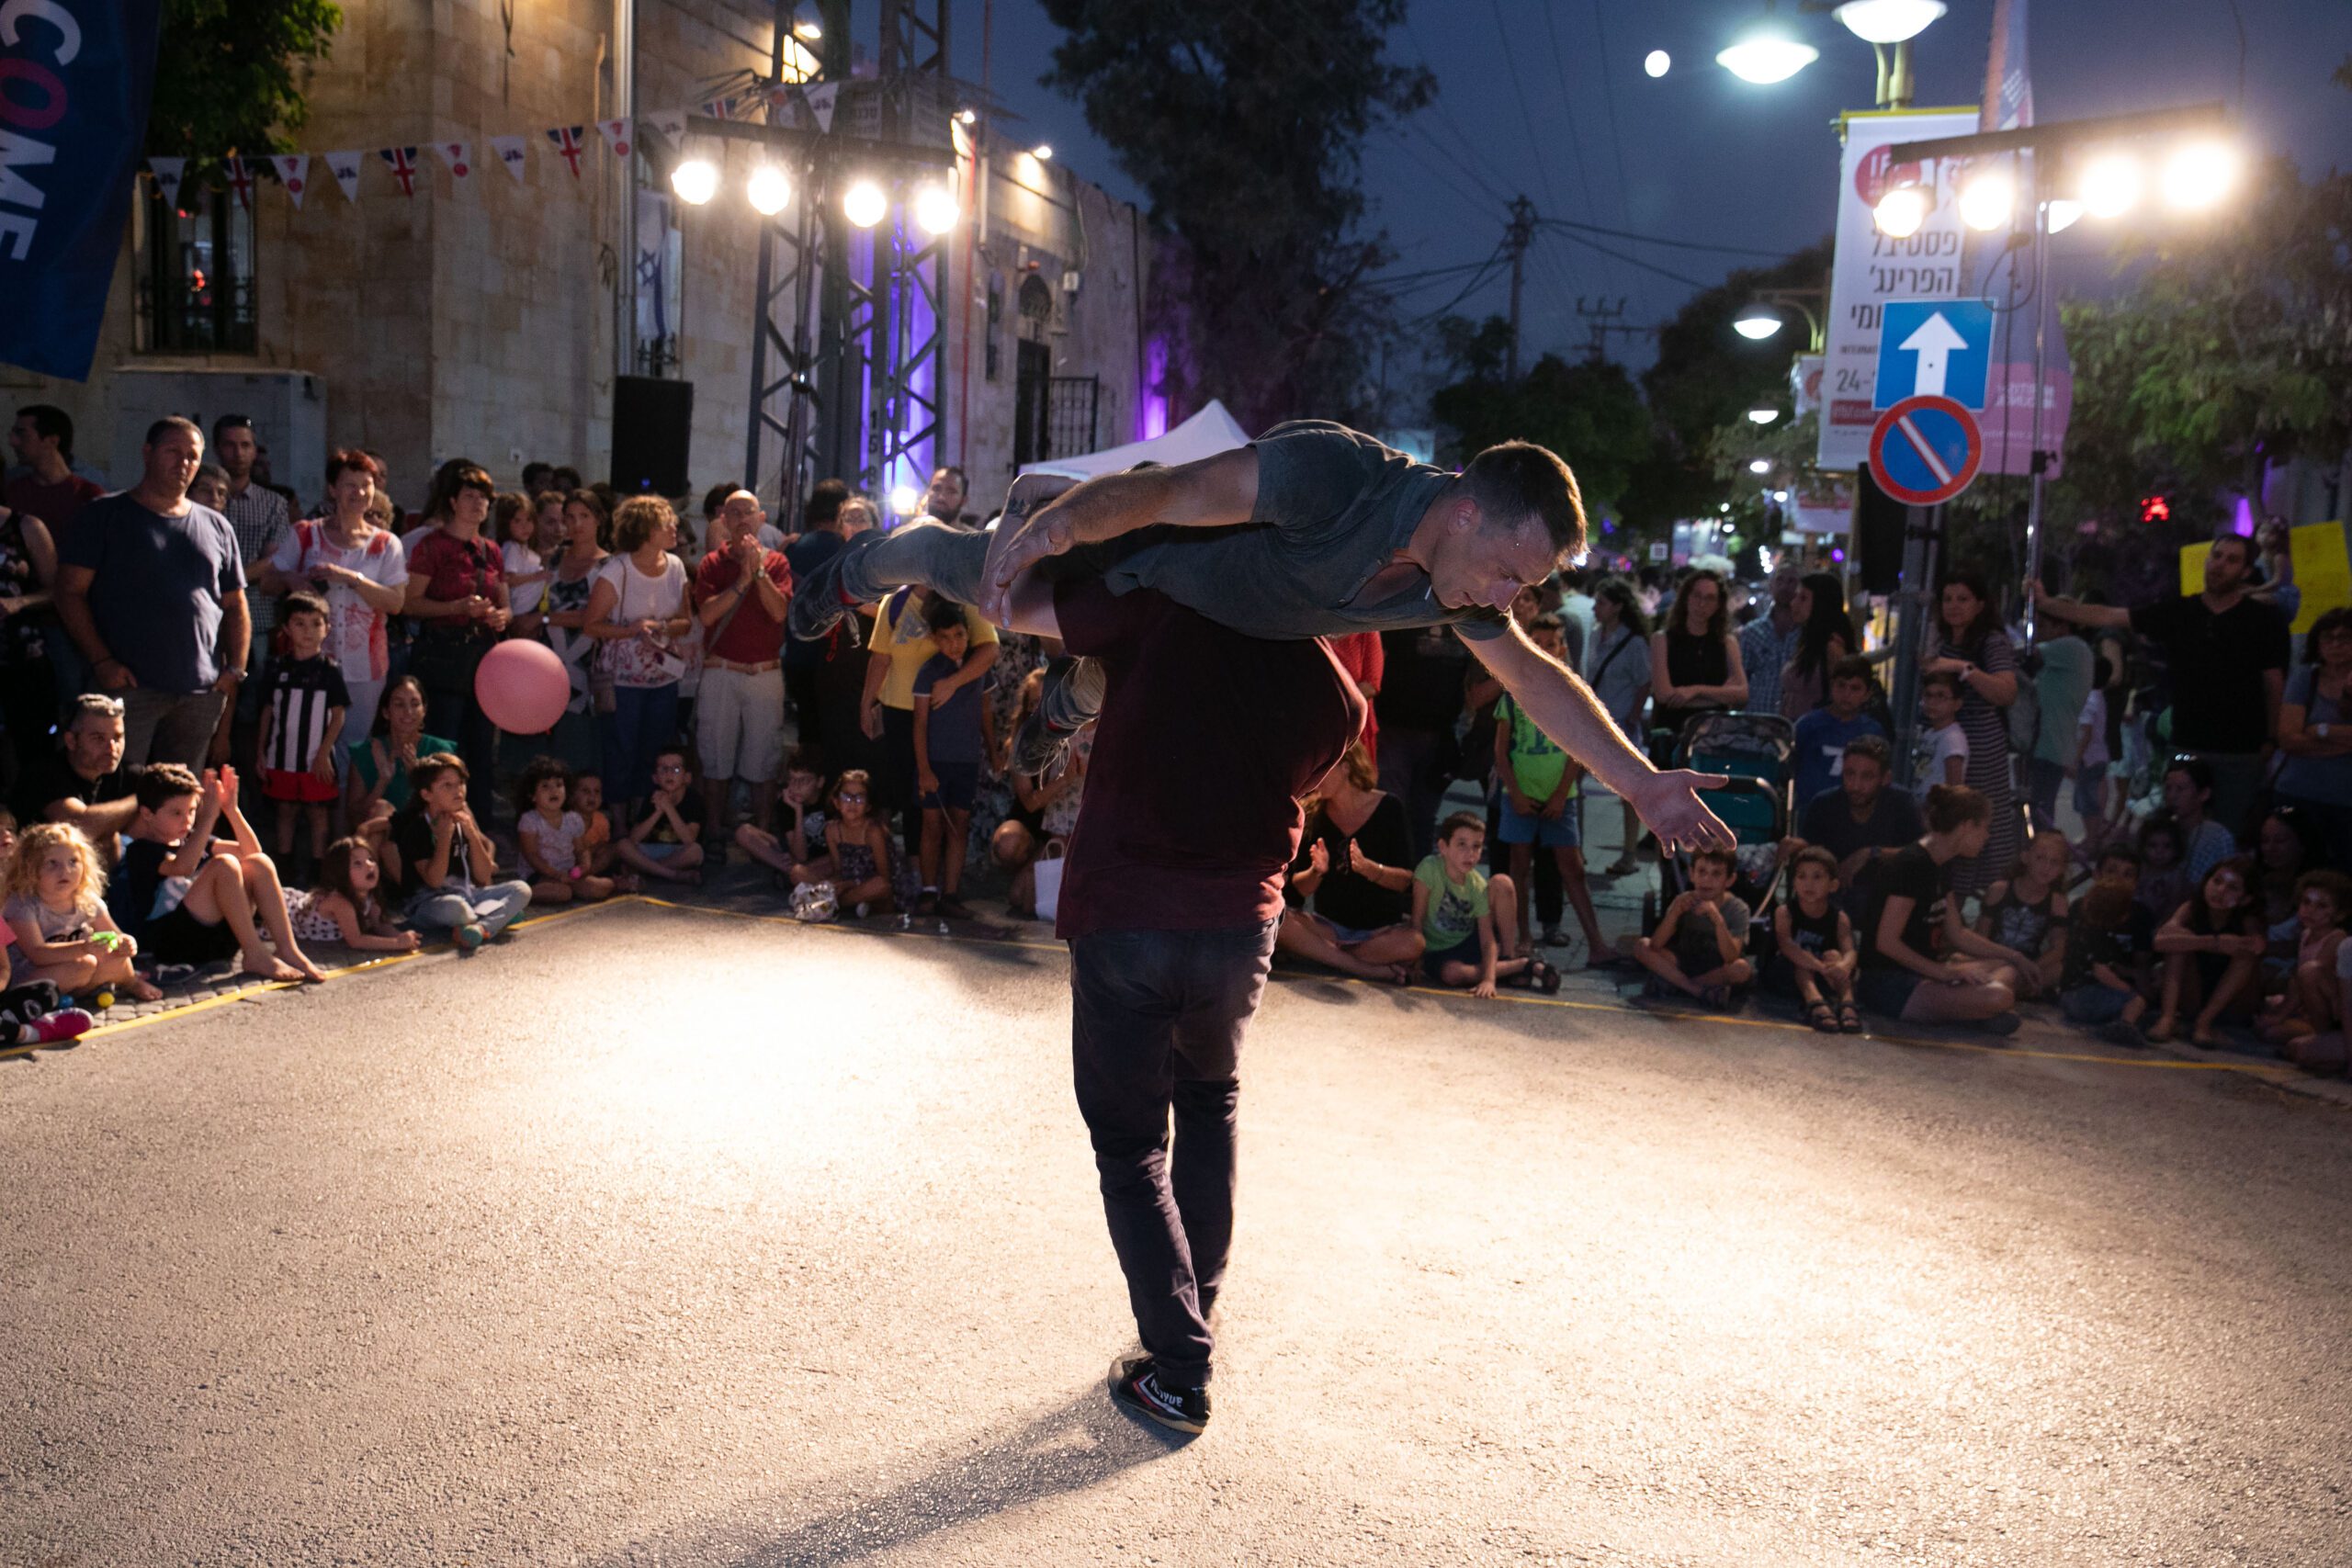 On the street at night time surrounded by a crowded audience, one performer is carrying another performer holding onto their hips on their left shoulder.